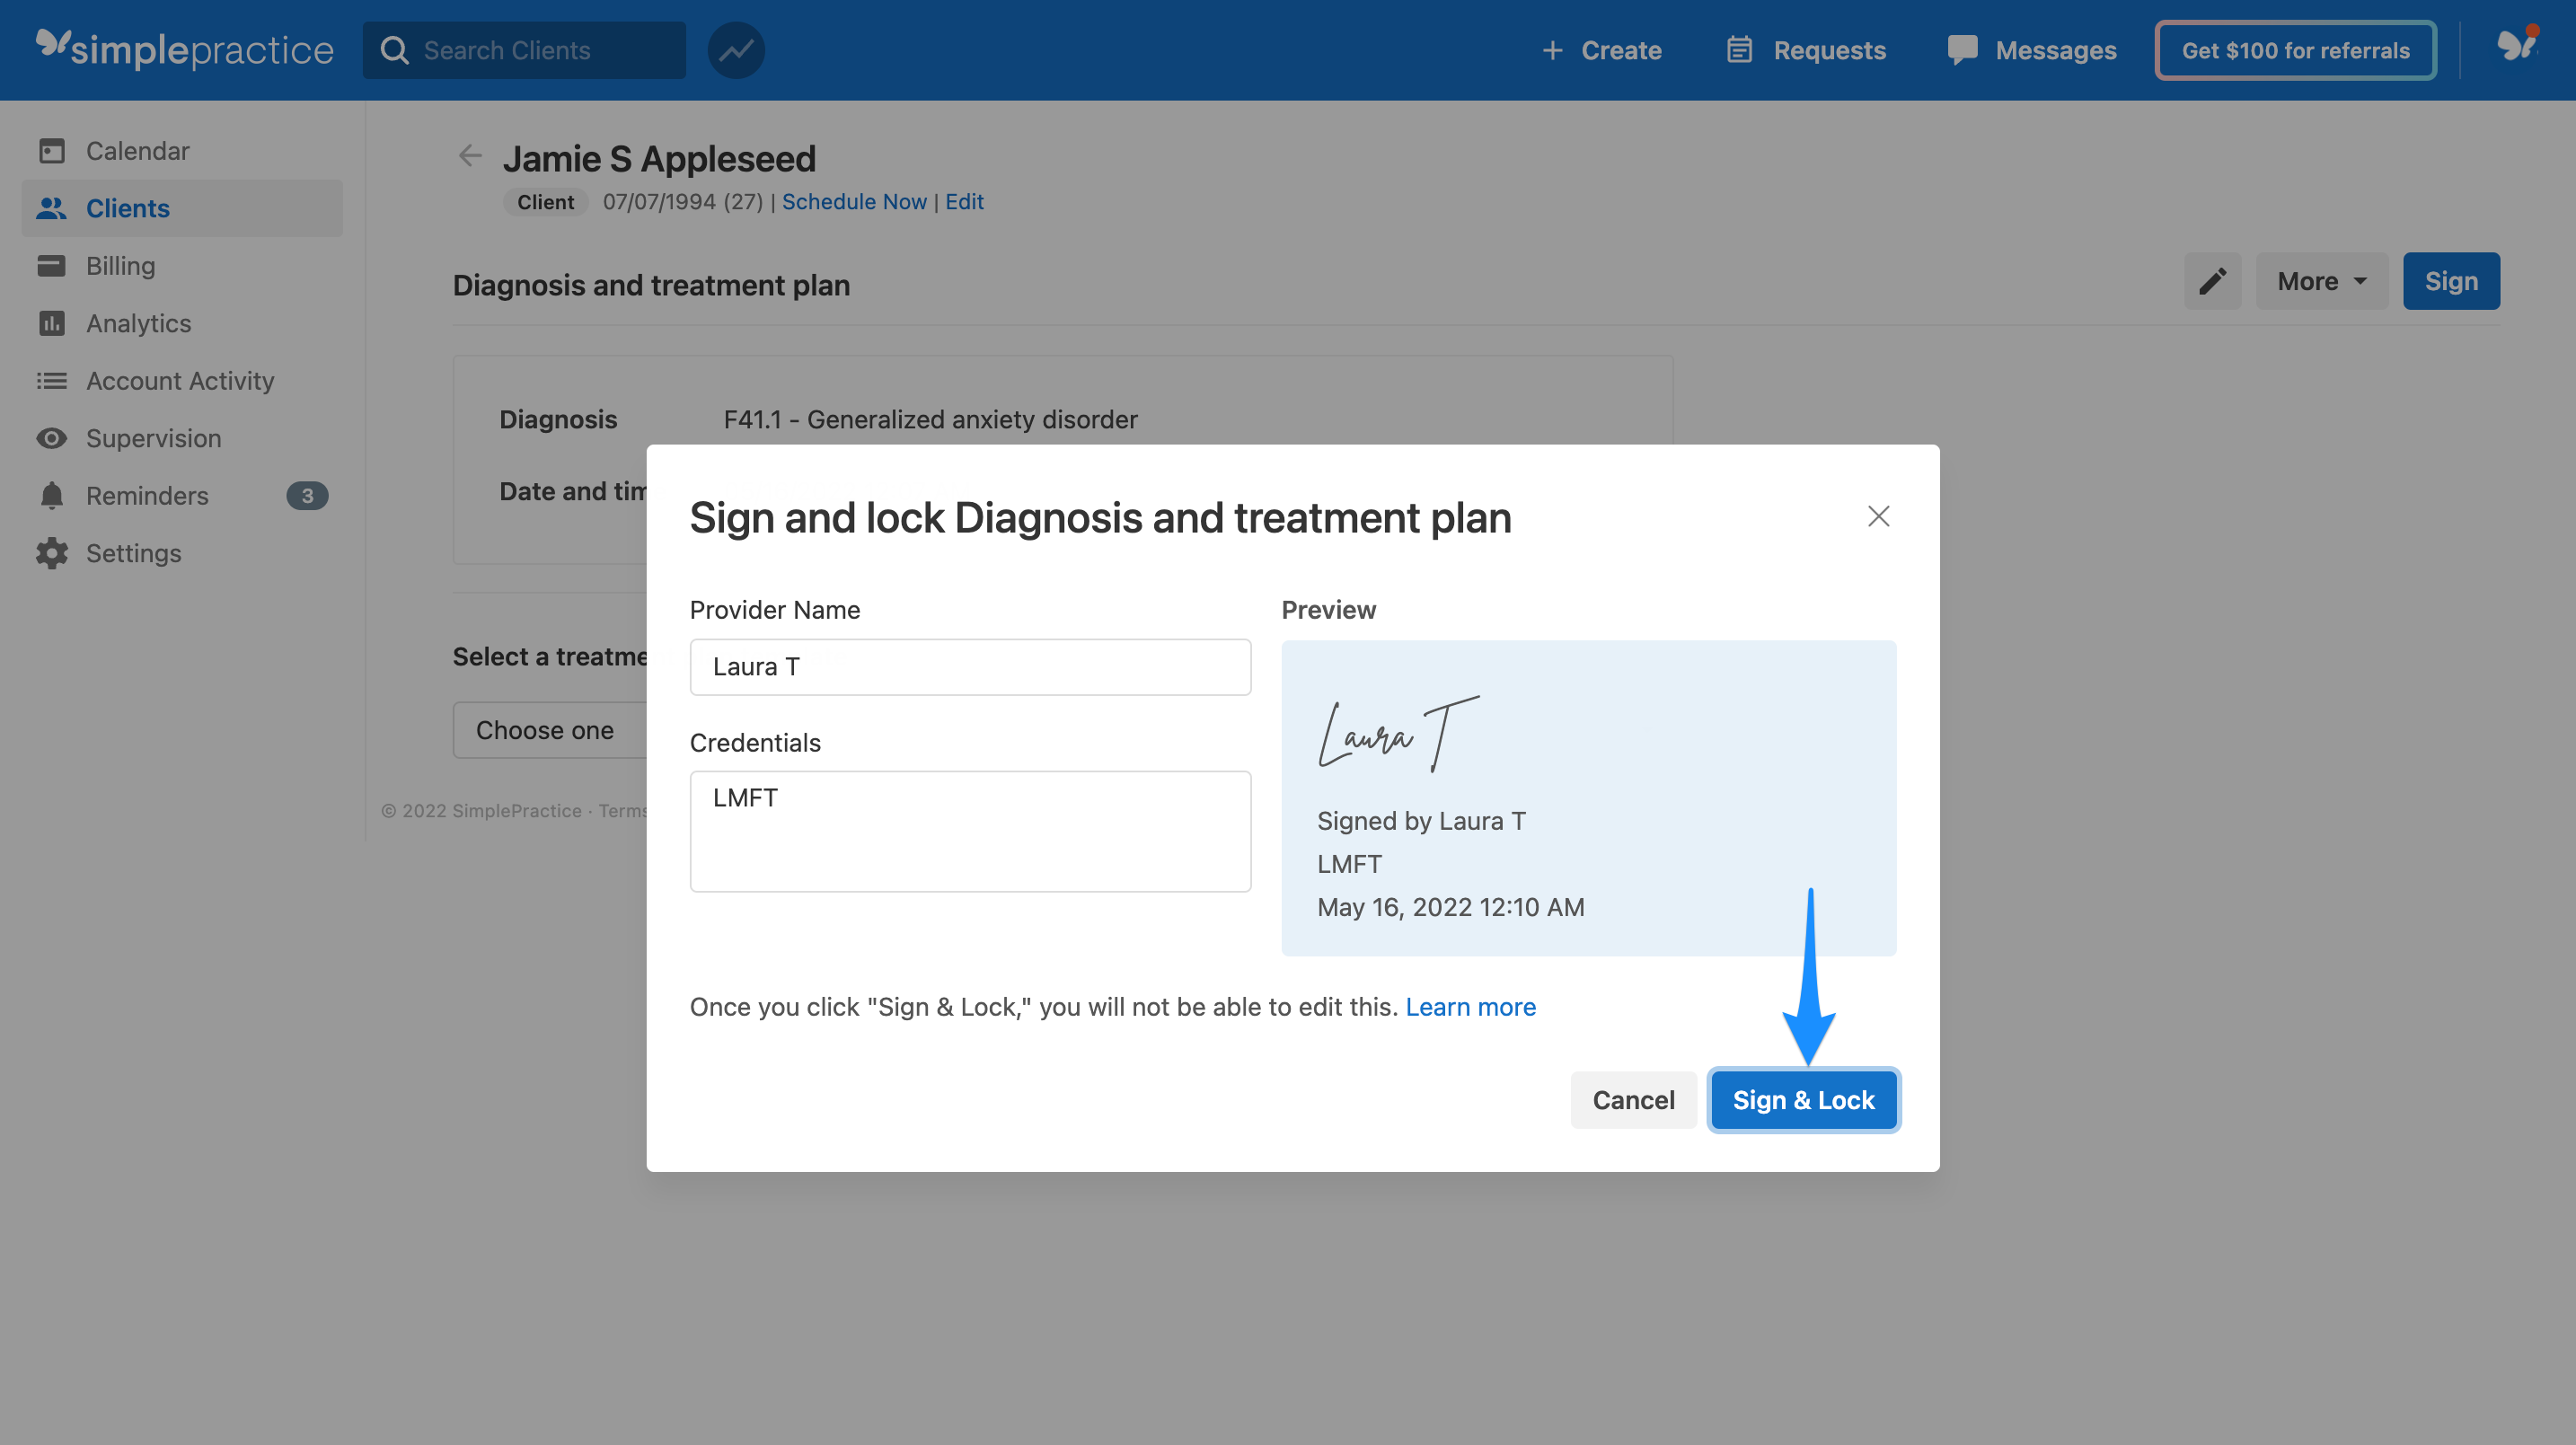 signdiagnosis.simplepractice.notesanddocs.png